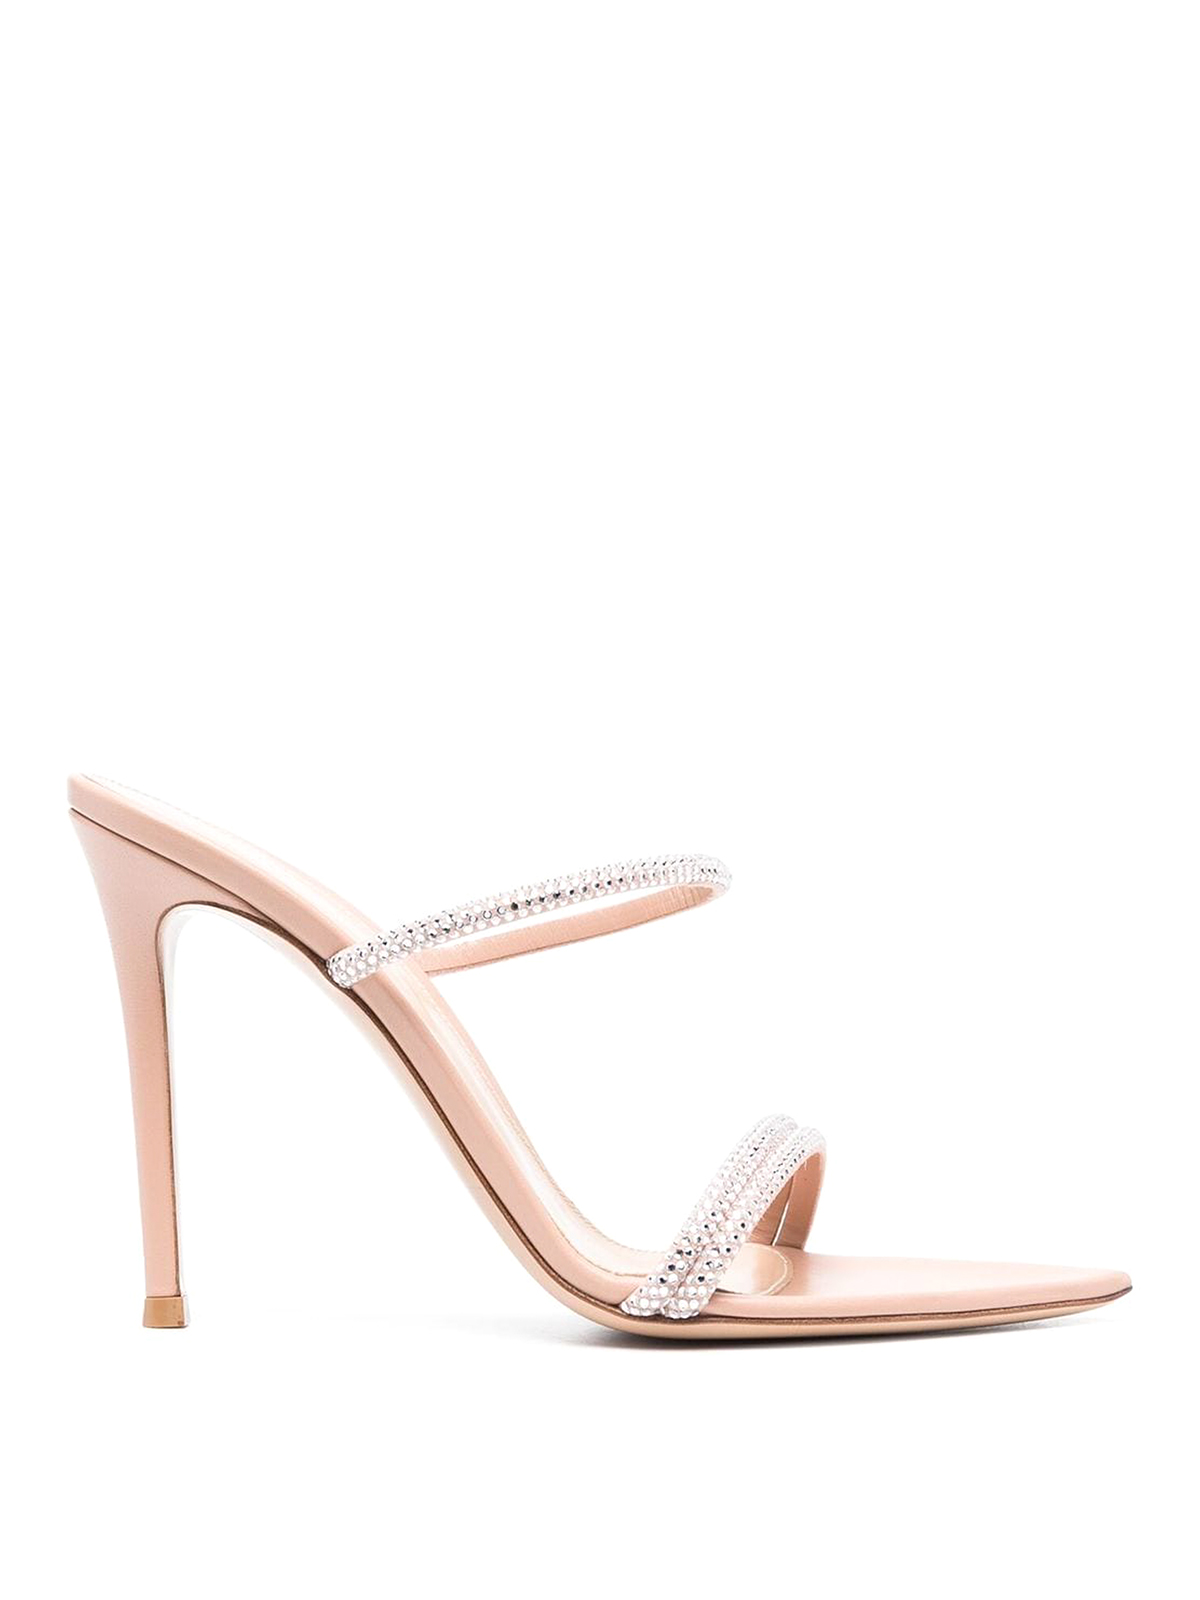 Gianvito Rossi Heeled Sandals Embellished With Rhinestone In Rosado